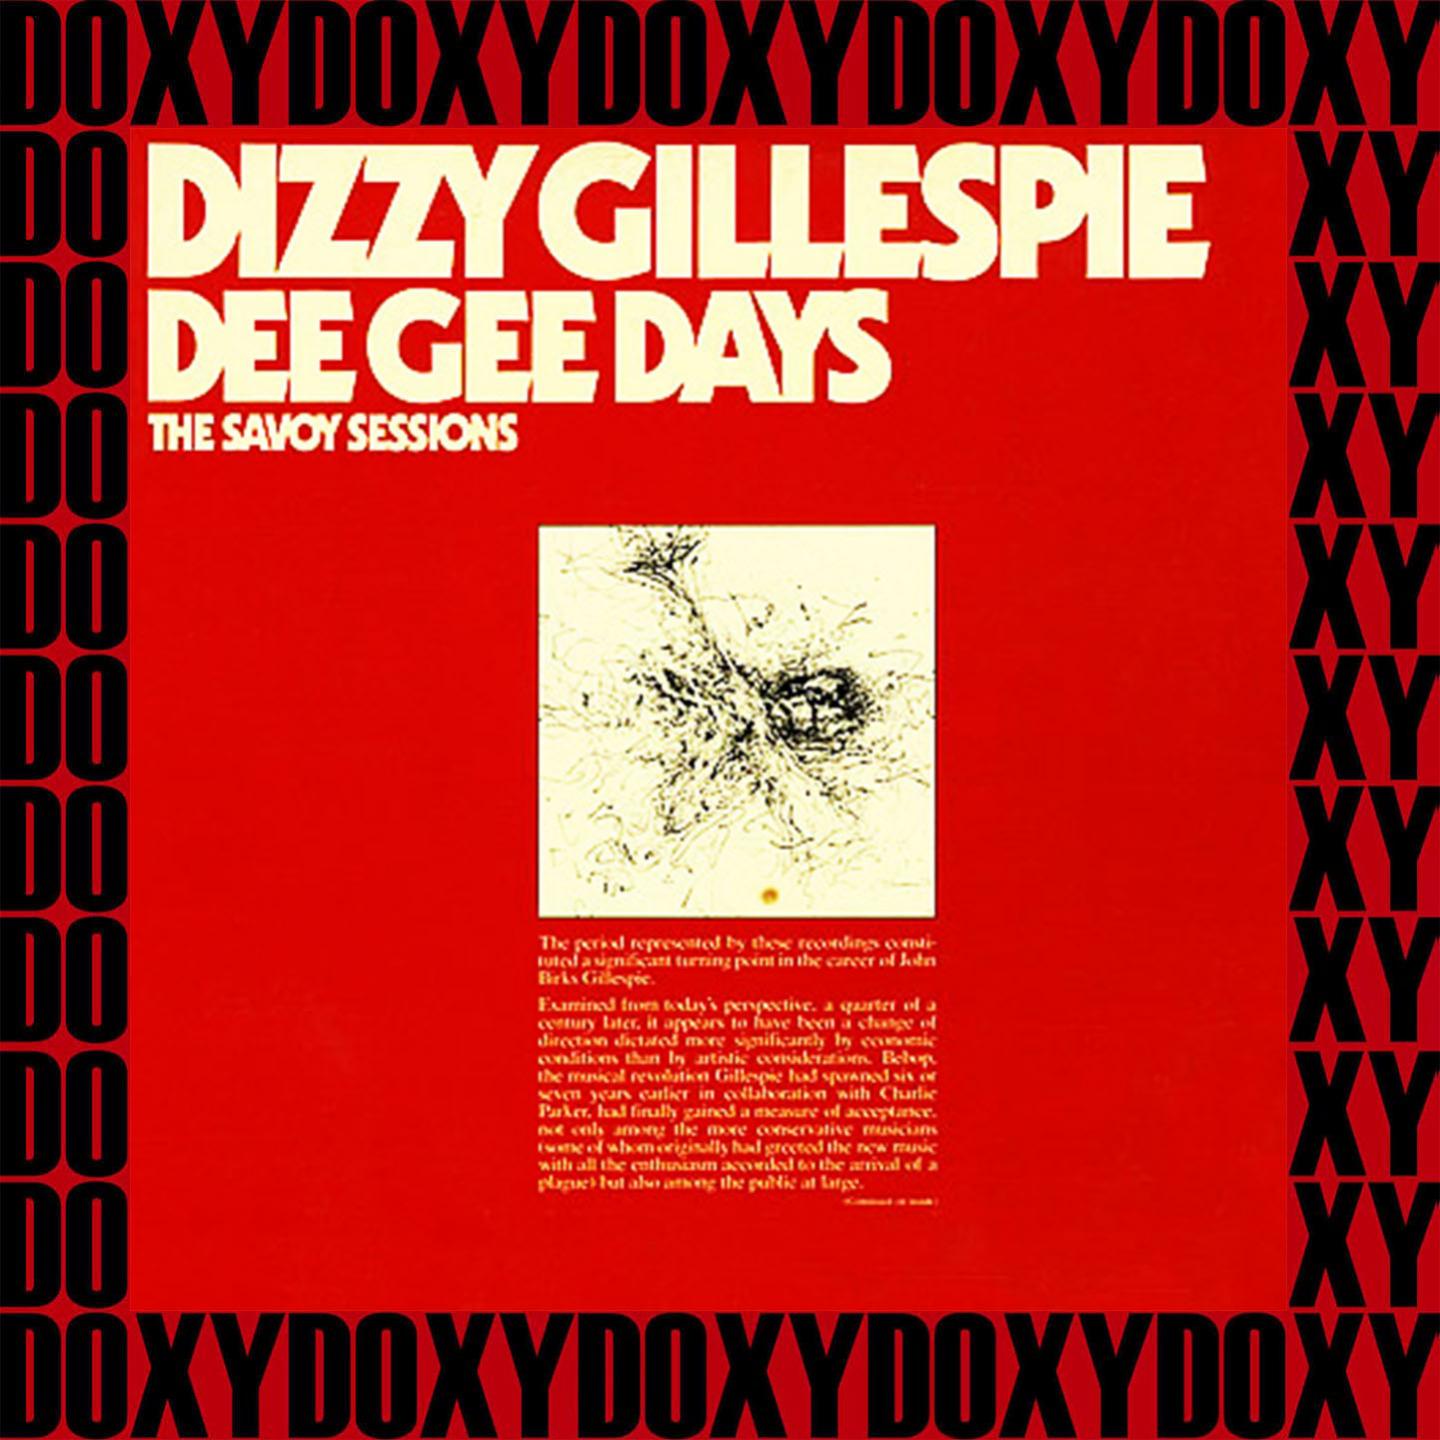 DeeGee Days, The Savoy Sessions (Remastered Version) (Doxy Collection)